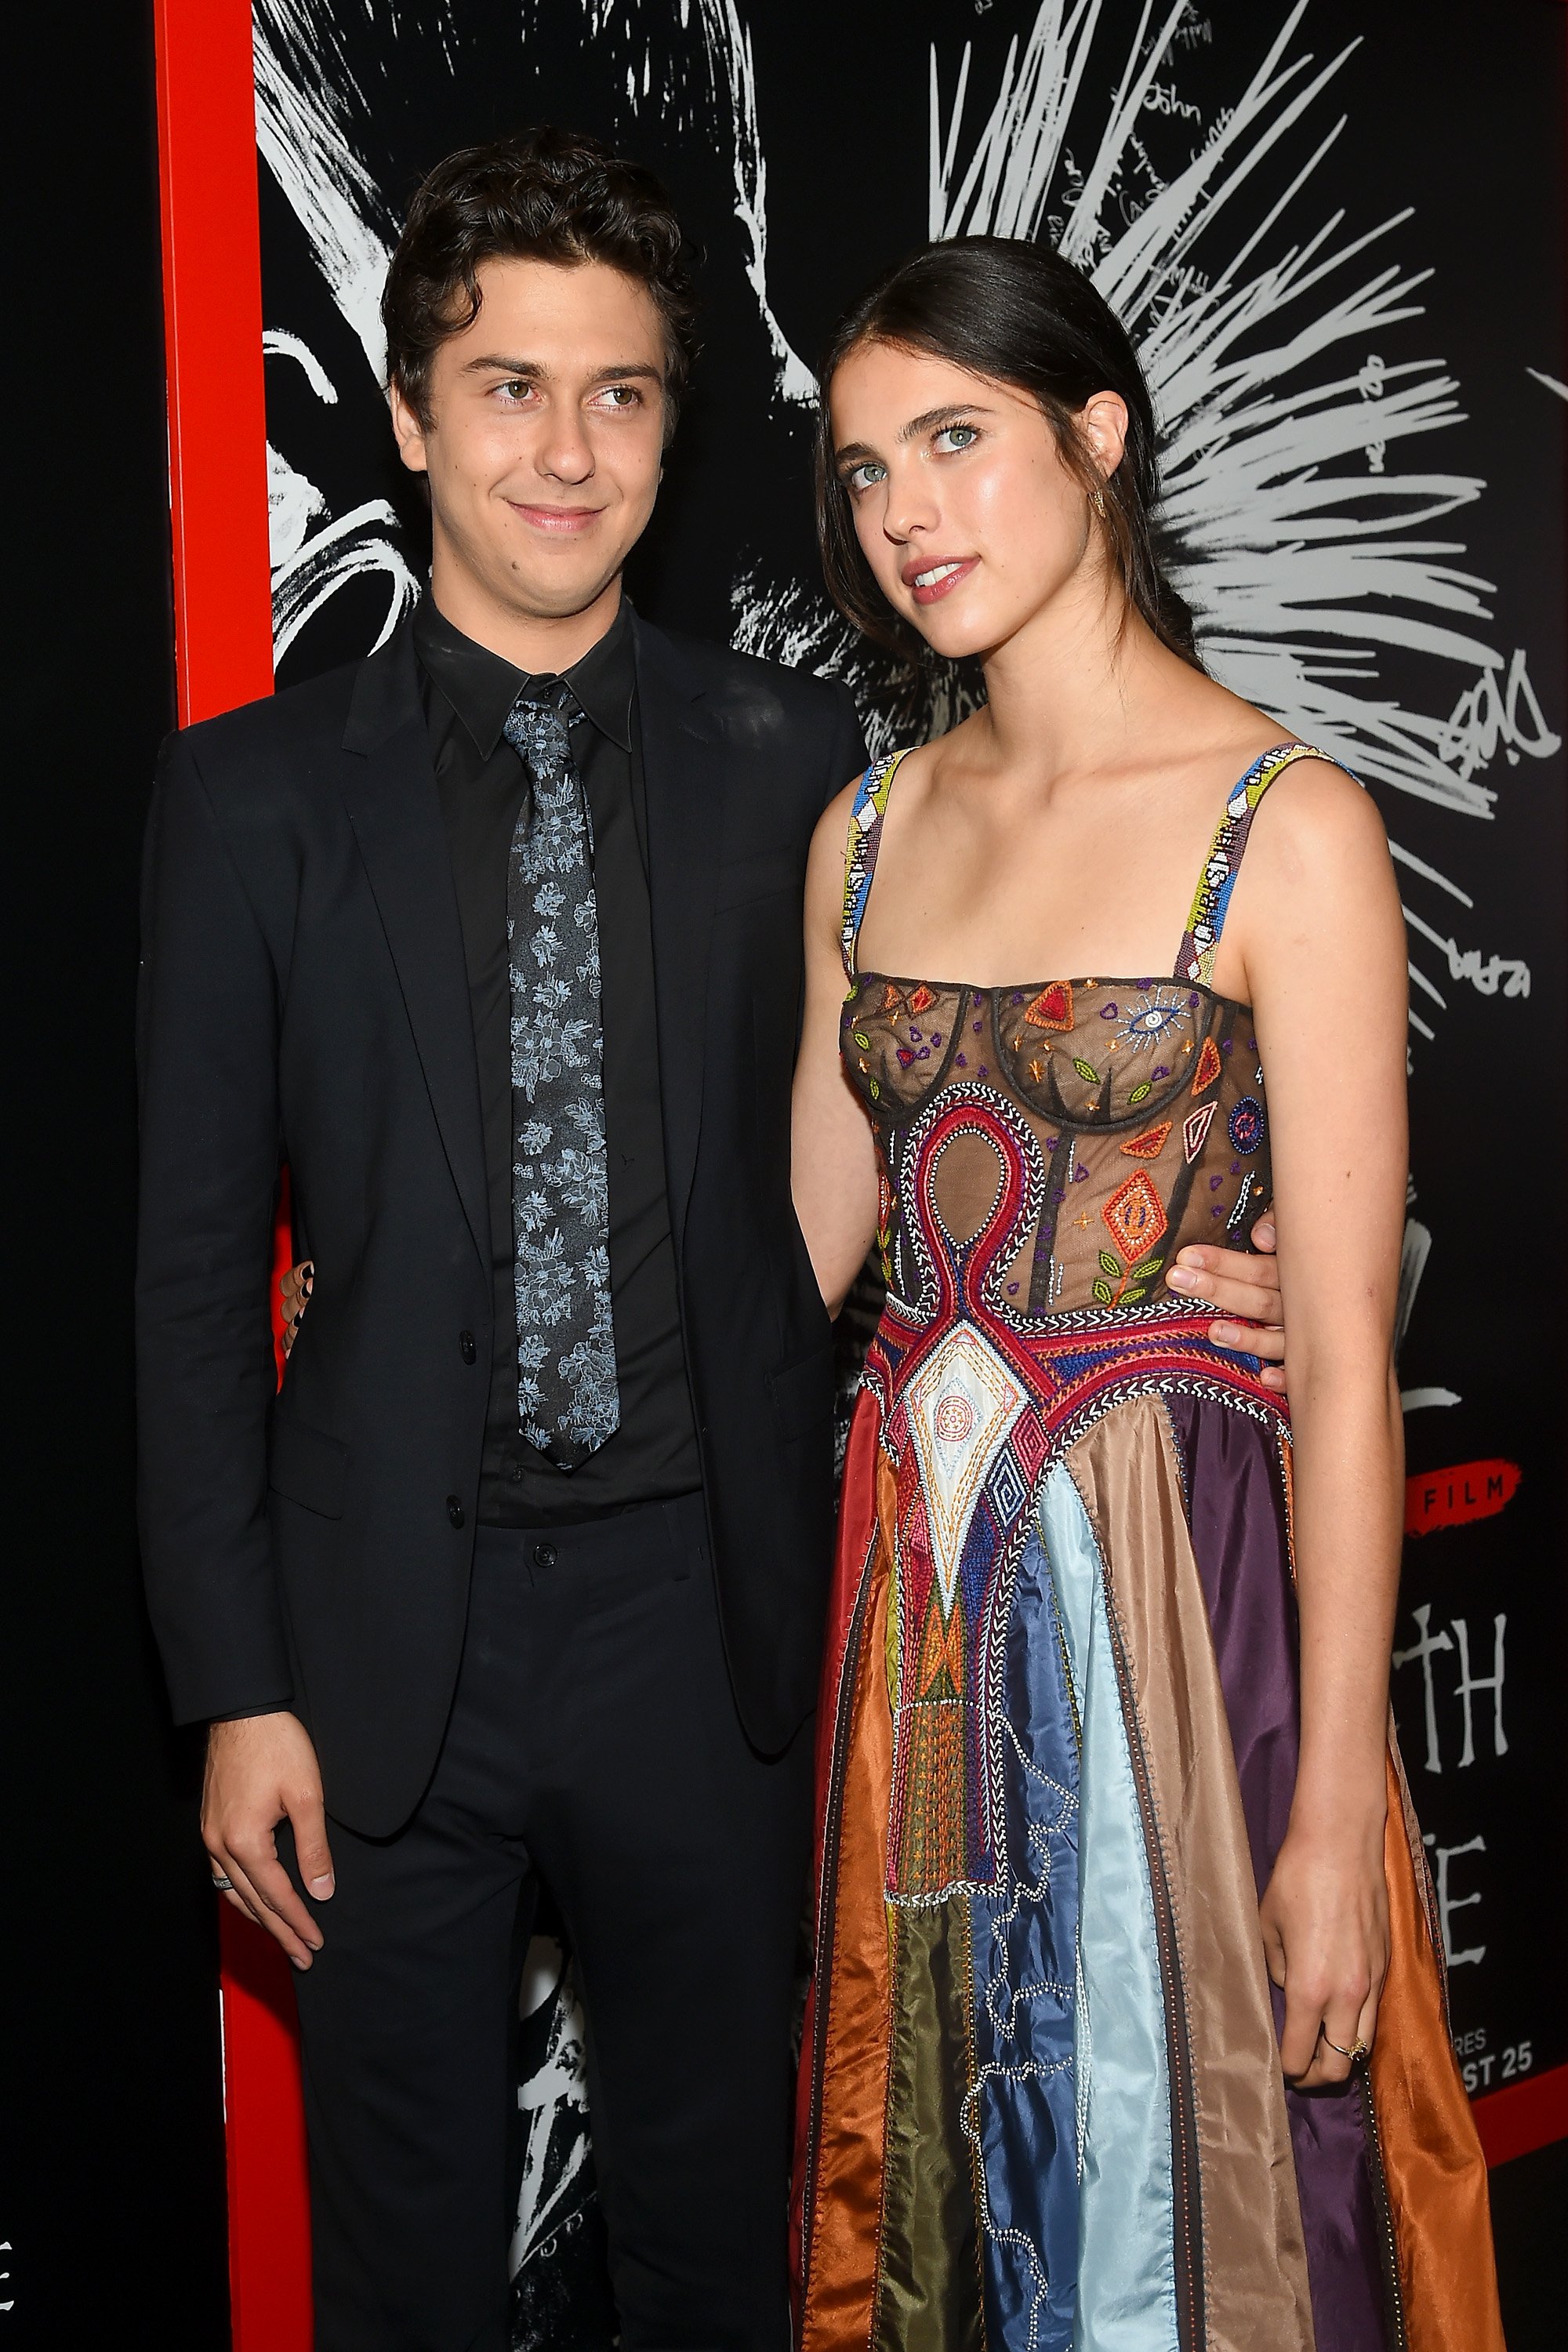 Margaret Qualley and Nat Wolff at the New York premiere of "Death Note" on August 17, 2017 | Source: Getty Images